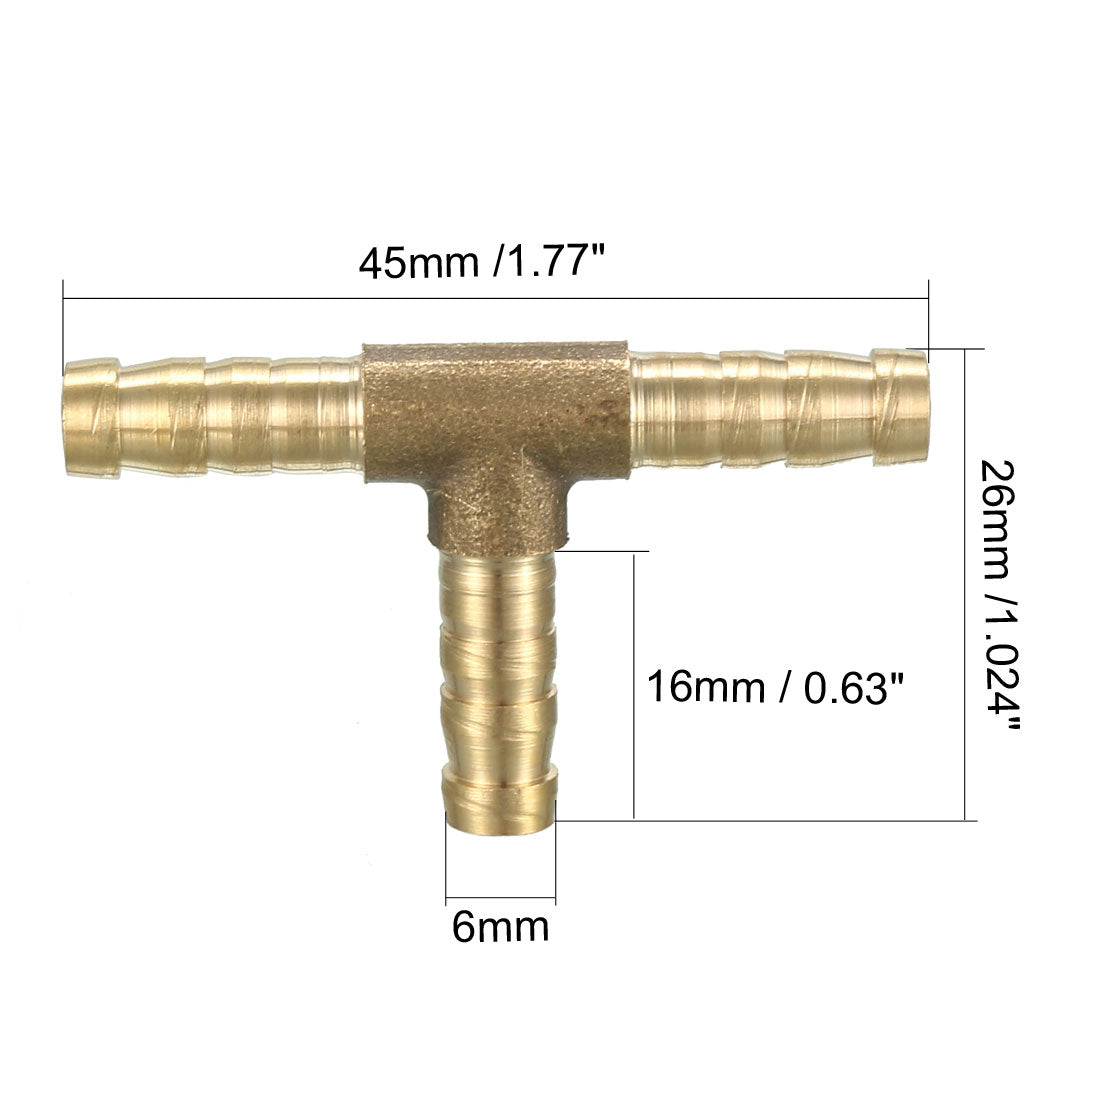 uxcell Uxcell 6mm Brass Tee Barb Hose Fitting T 3 Way Connector Joiner 2pcs